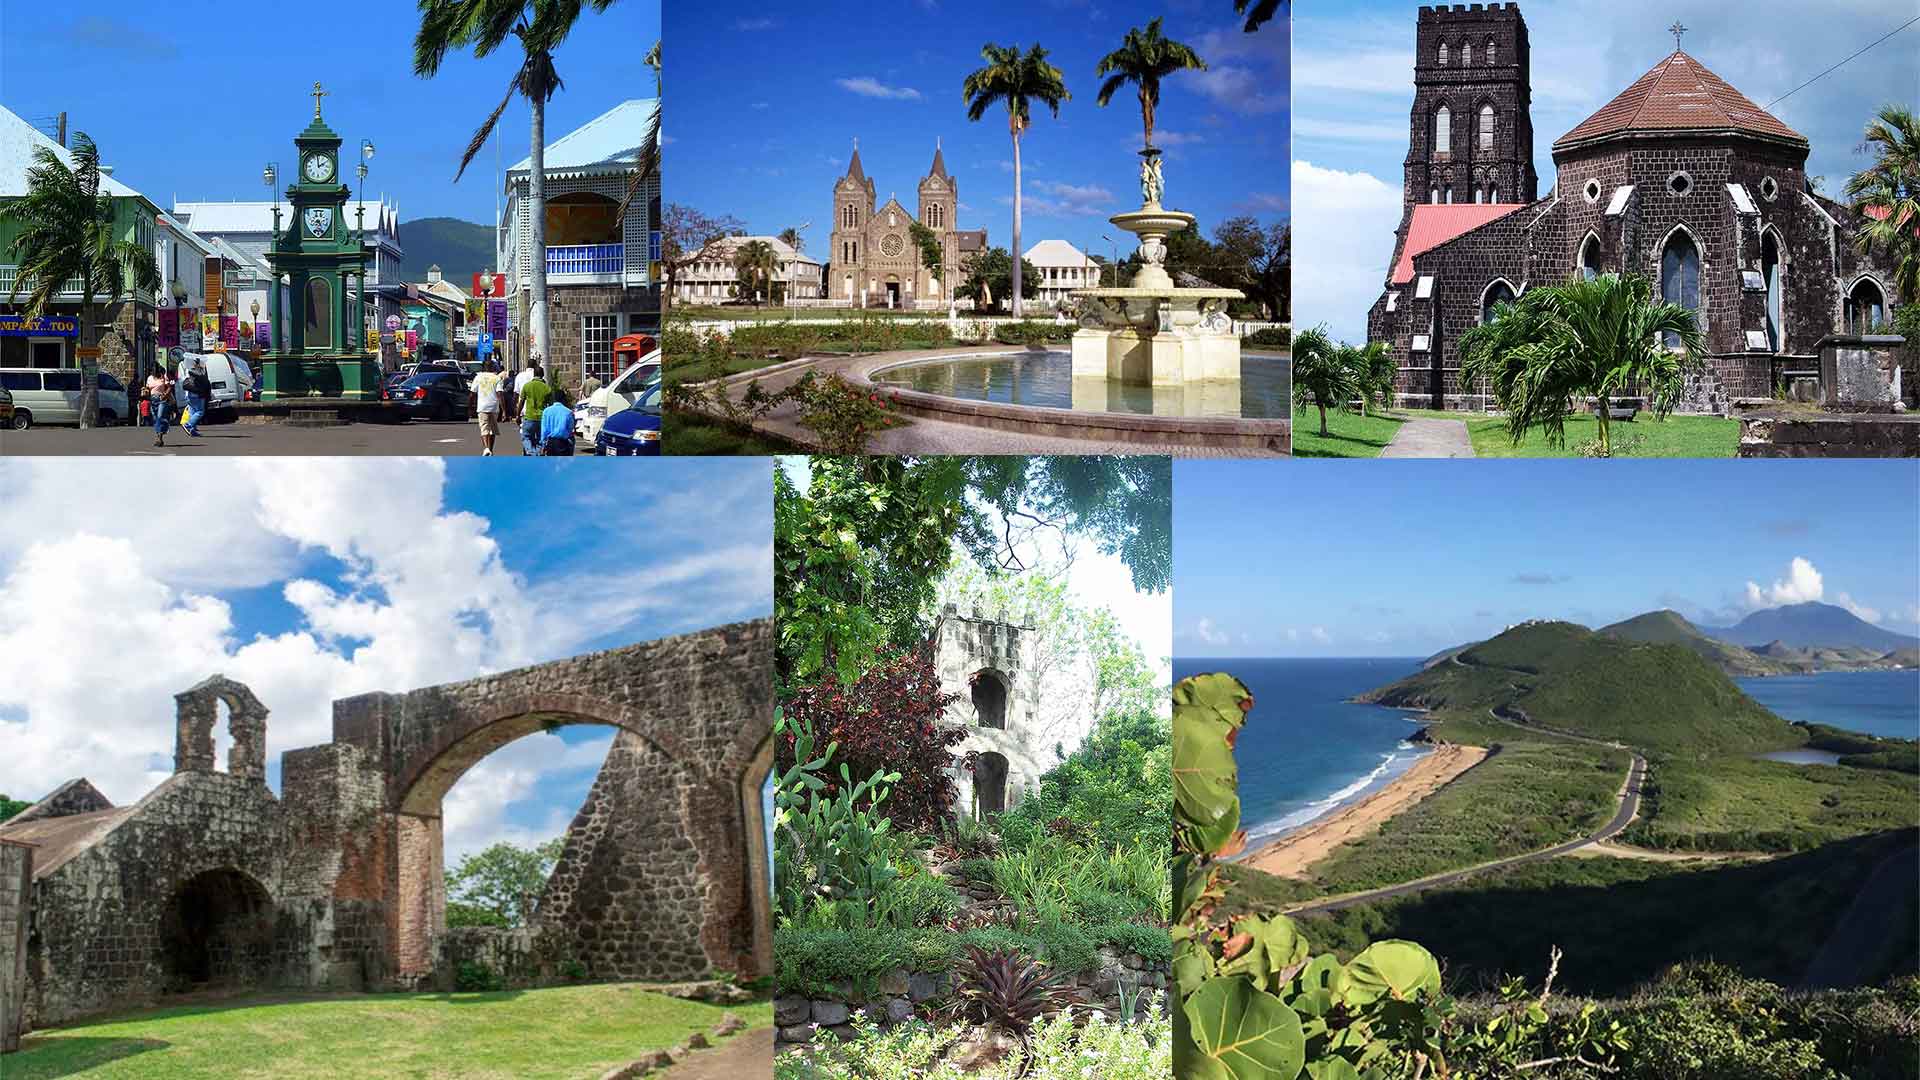 Highlights of St Kitts tour